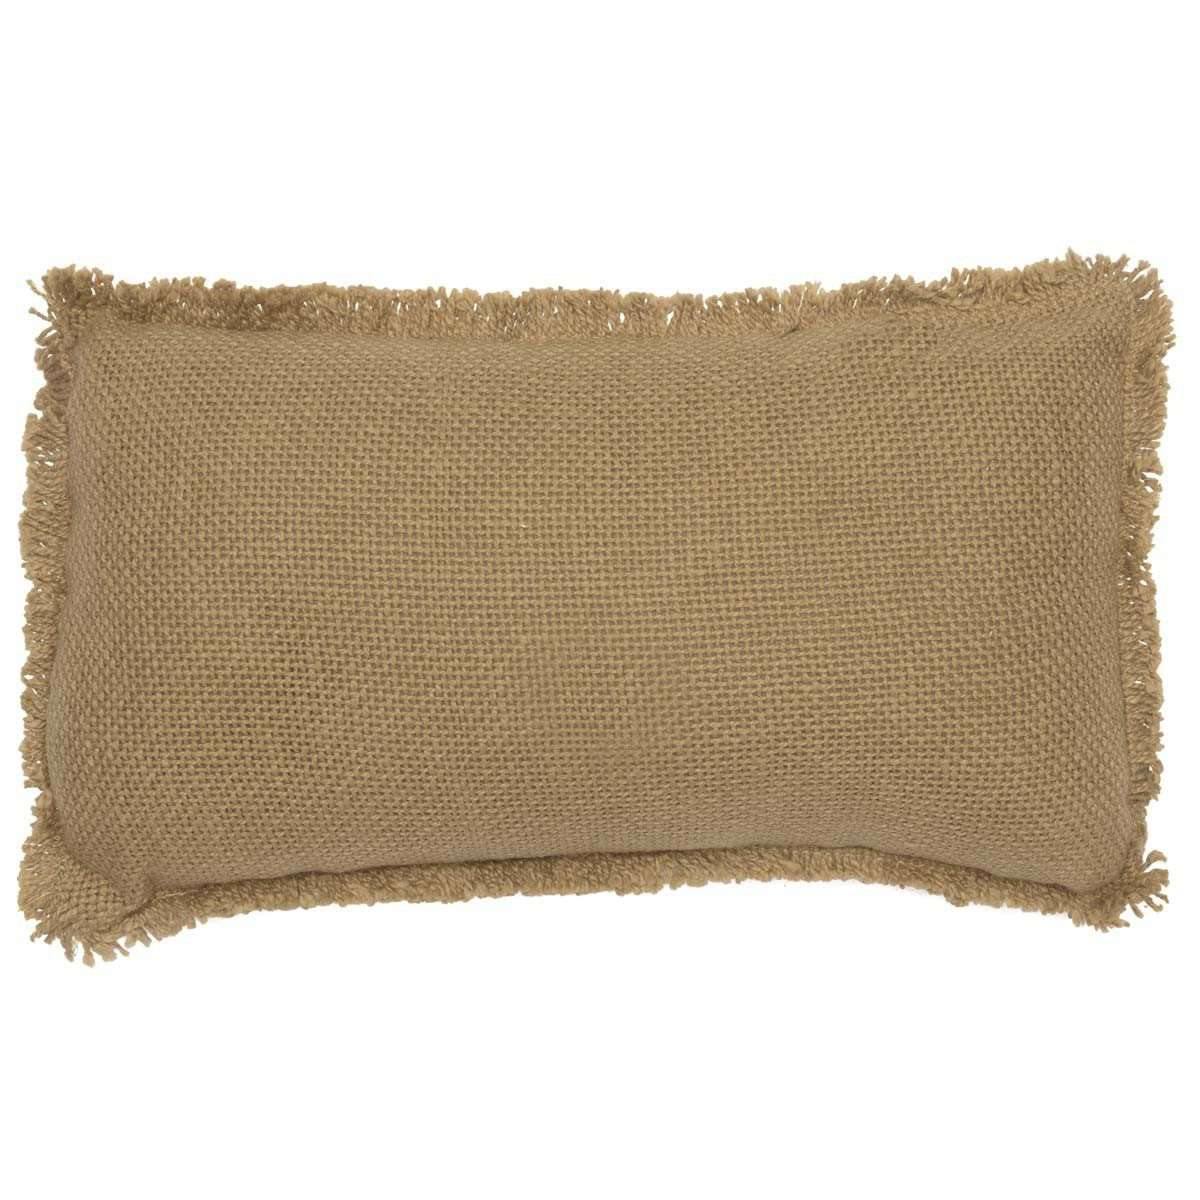 Burlap Natural Pillow Happily Ever After 7x13 VHC Brands back